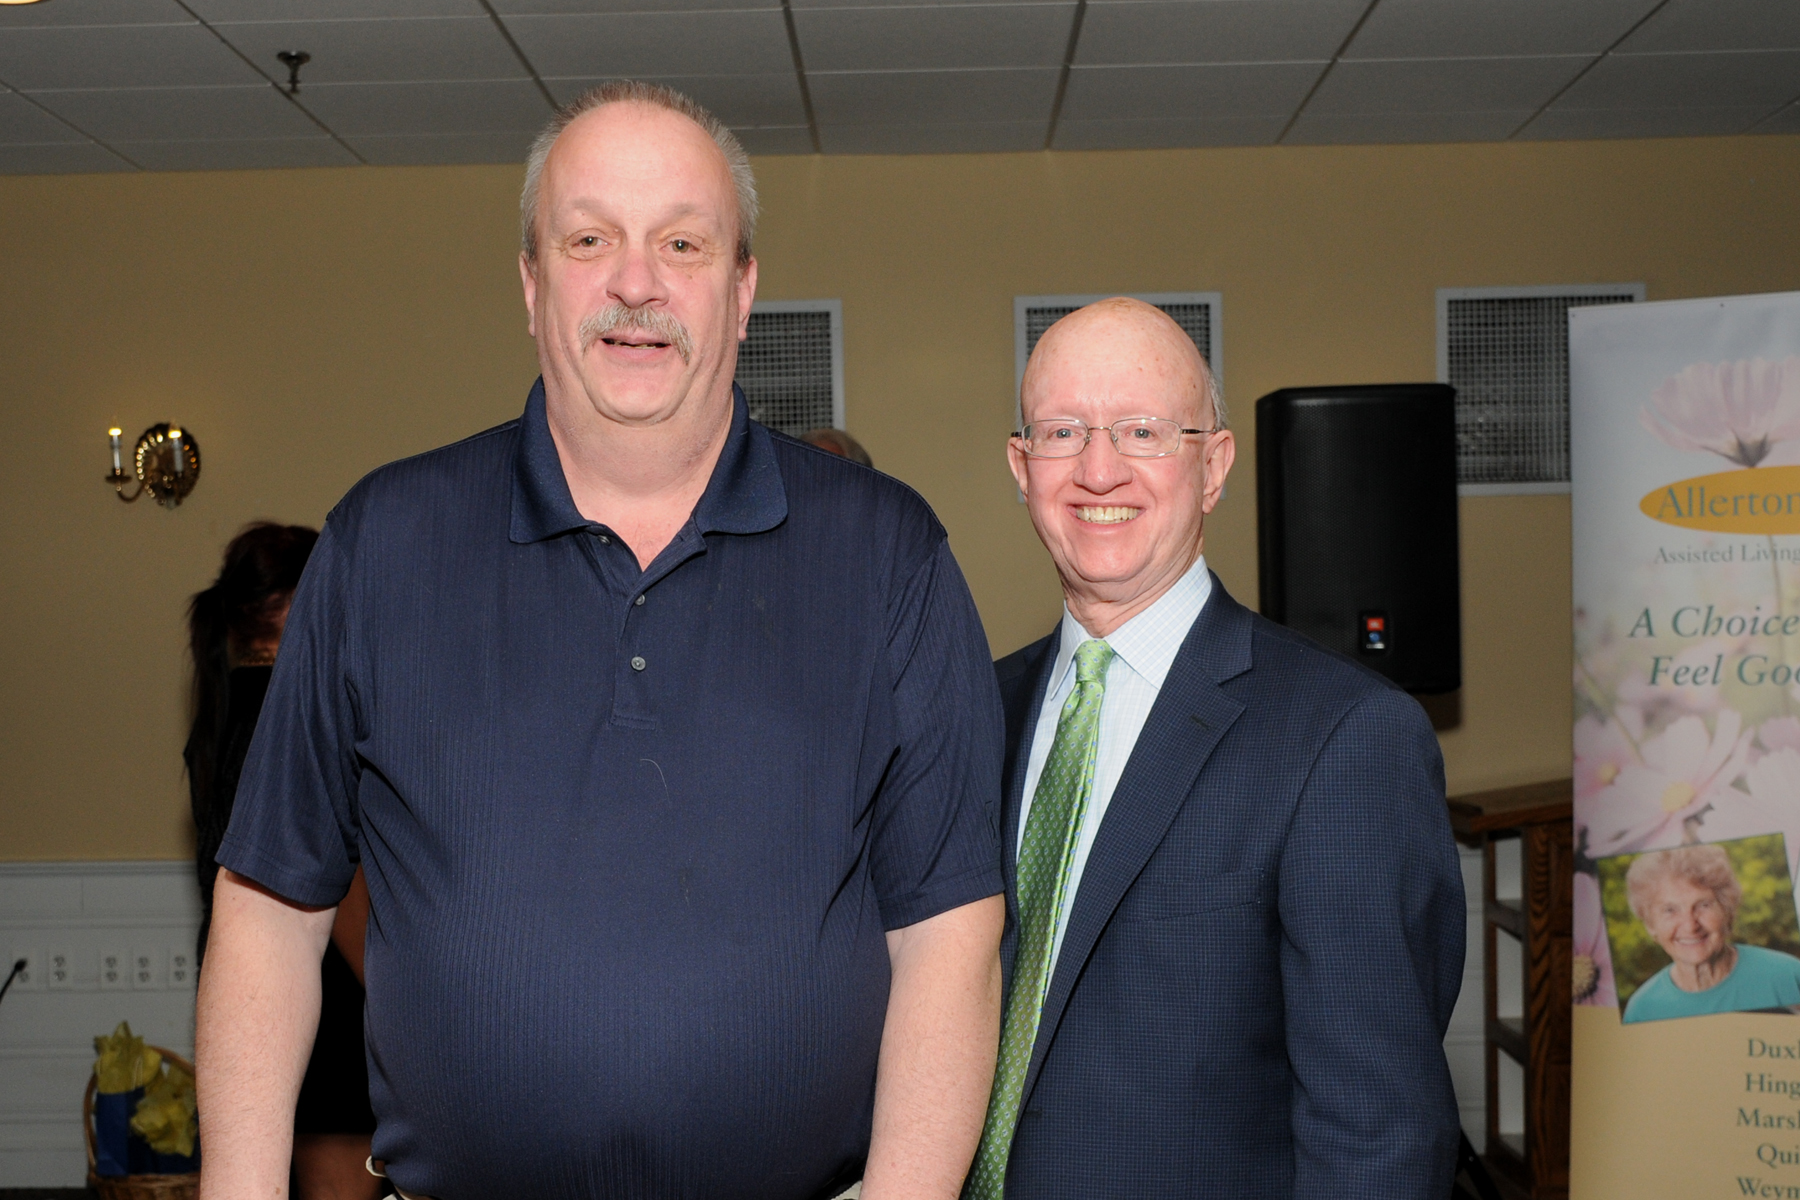 Paul Casale (right), Vice-President of Welch Group, congratulates Bob Brown of Village at Proprietors Green in Marshfield, on winning the Employee of the Year Award and a$1,500 gift voucher.